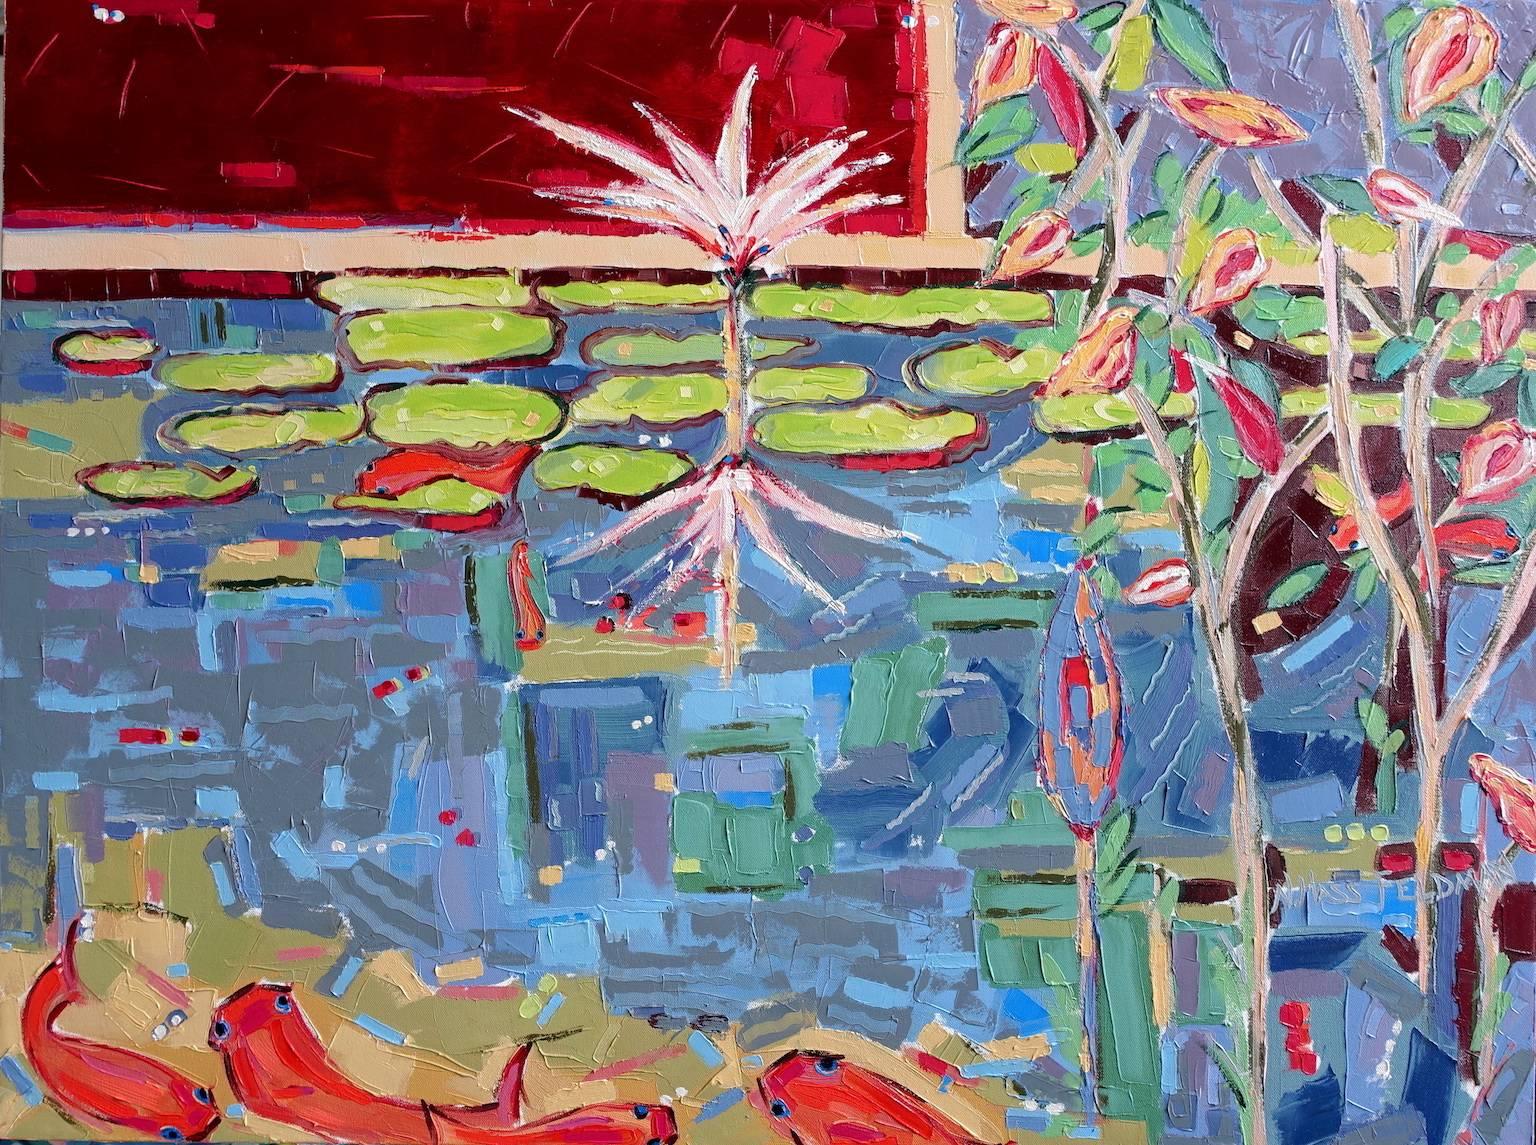 "Into the Pond 1", contemporary, water, flowers, fish, reds, blues, oil painting - Painting by Nan Hass Feldman